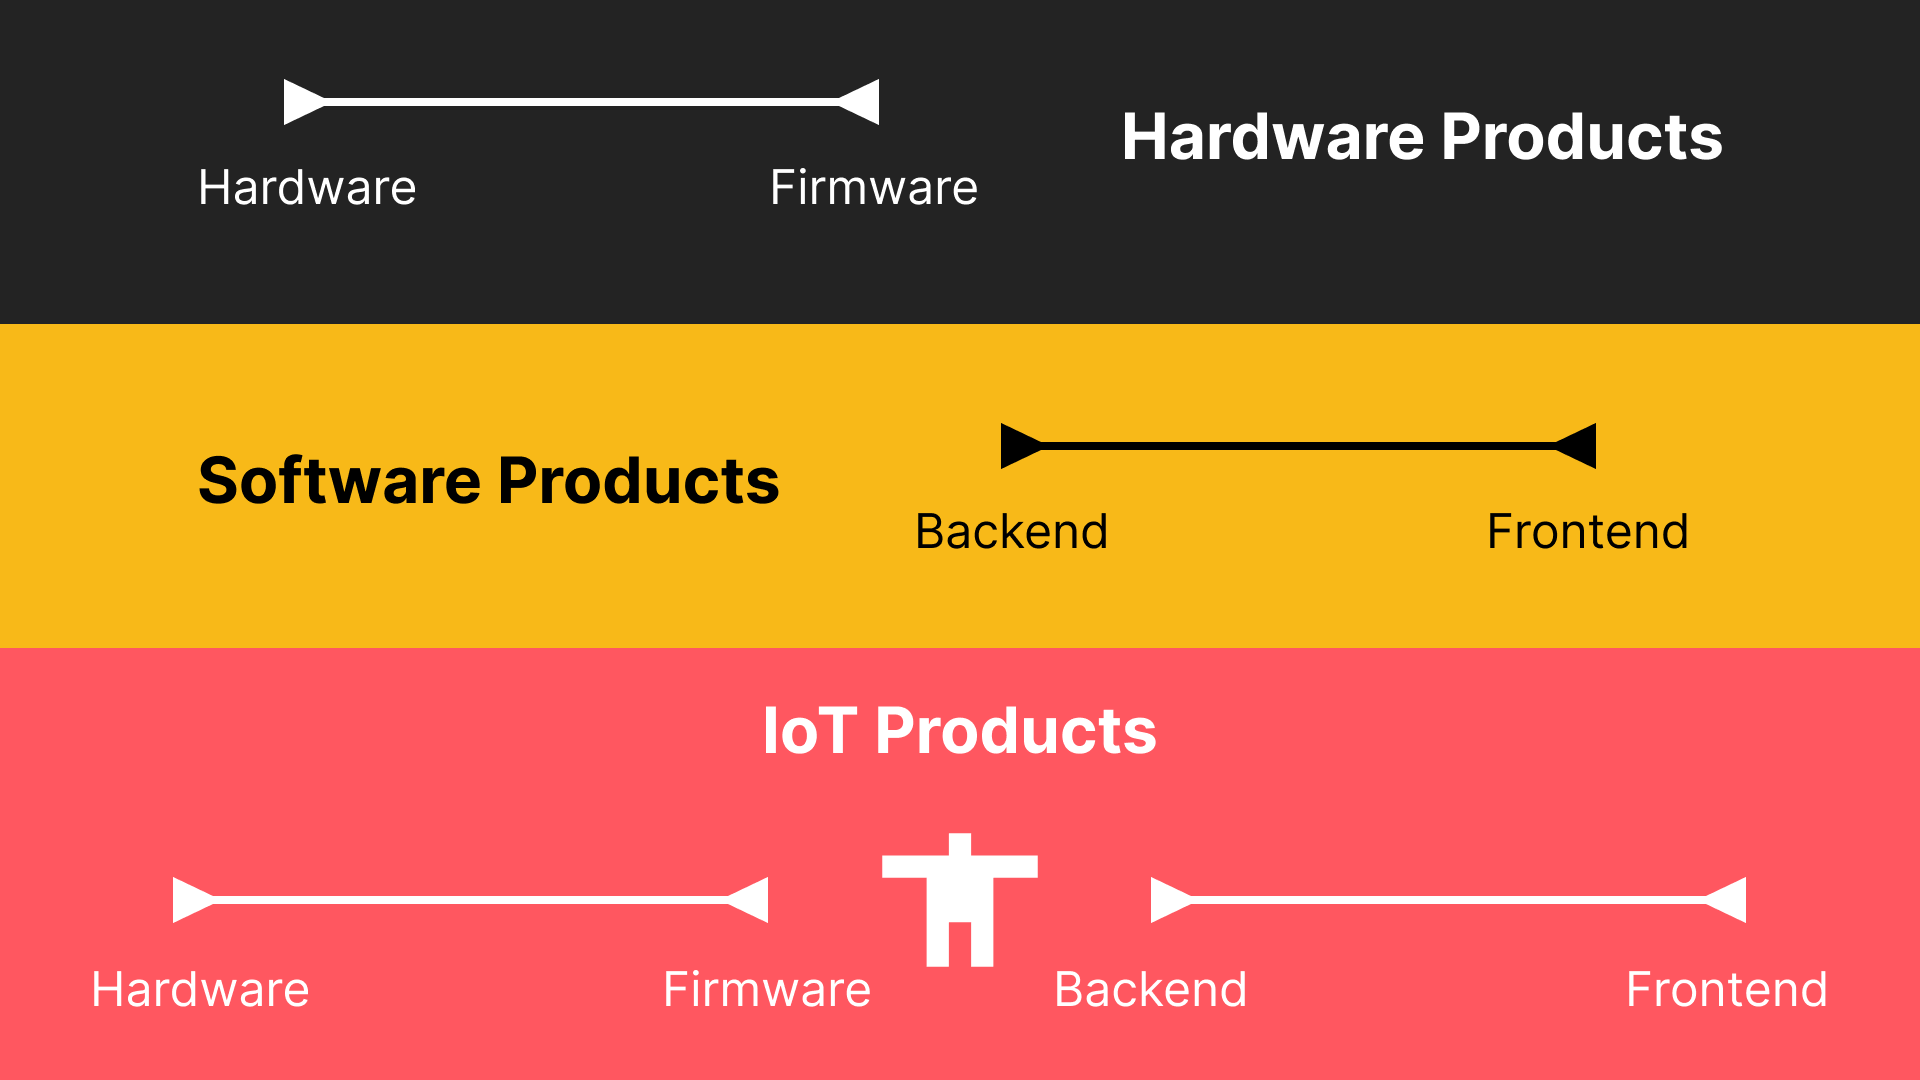 Three boxes, one describing hardware products as a spectrum between hardware and firmware, one describing software products as a spectrum between backend and frontend, and one combining them to describe IoT products.